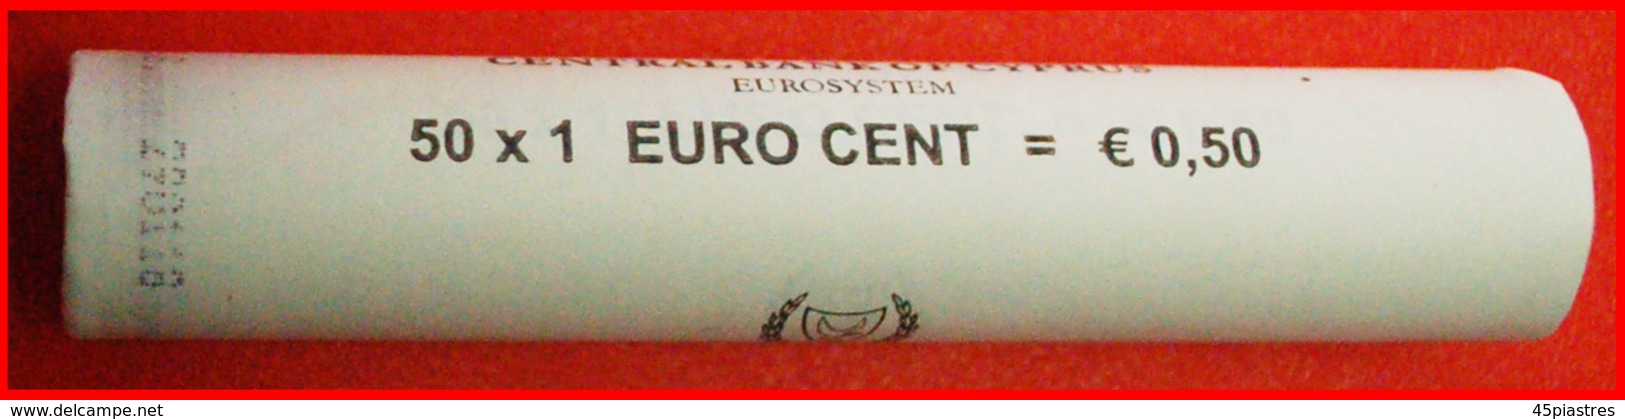 # GREECE: CYPRUS ★ 1 CENT 2018 UNC ROLL! LOW START ★ NO RESERVE! - Rolls